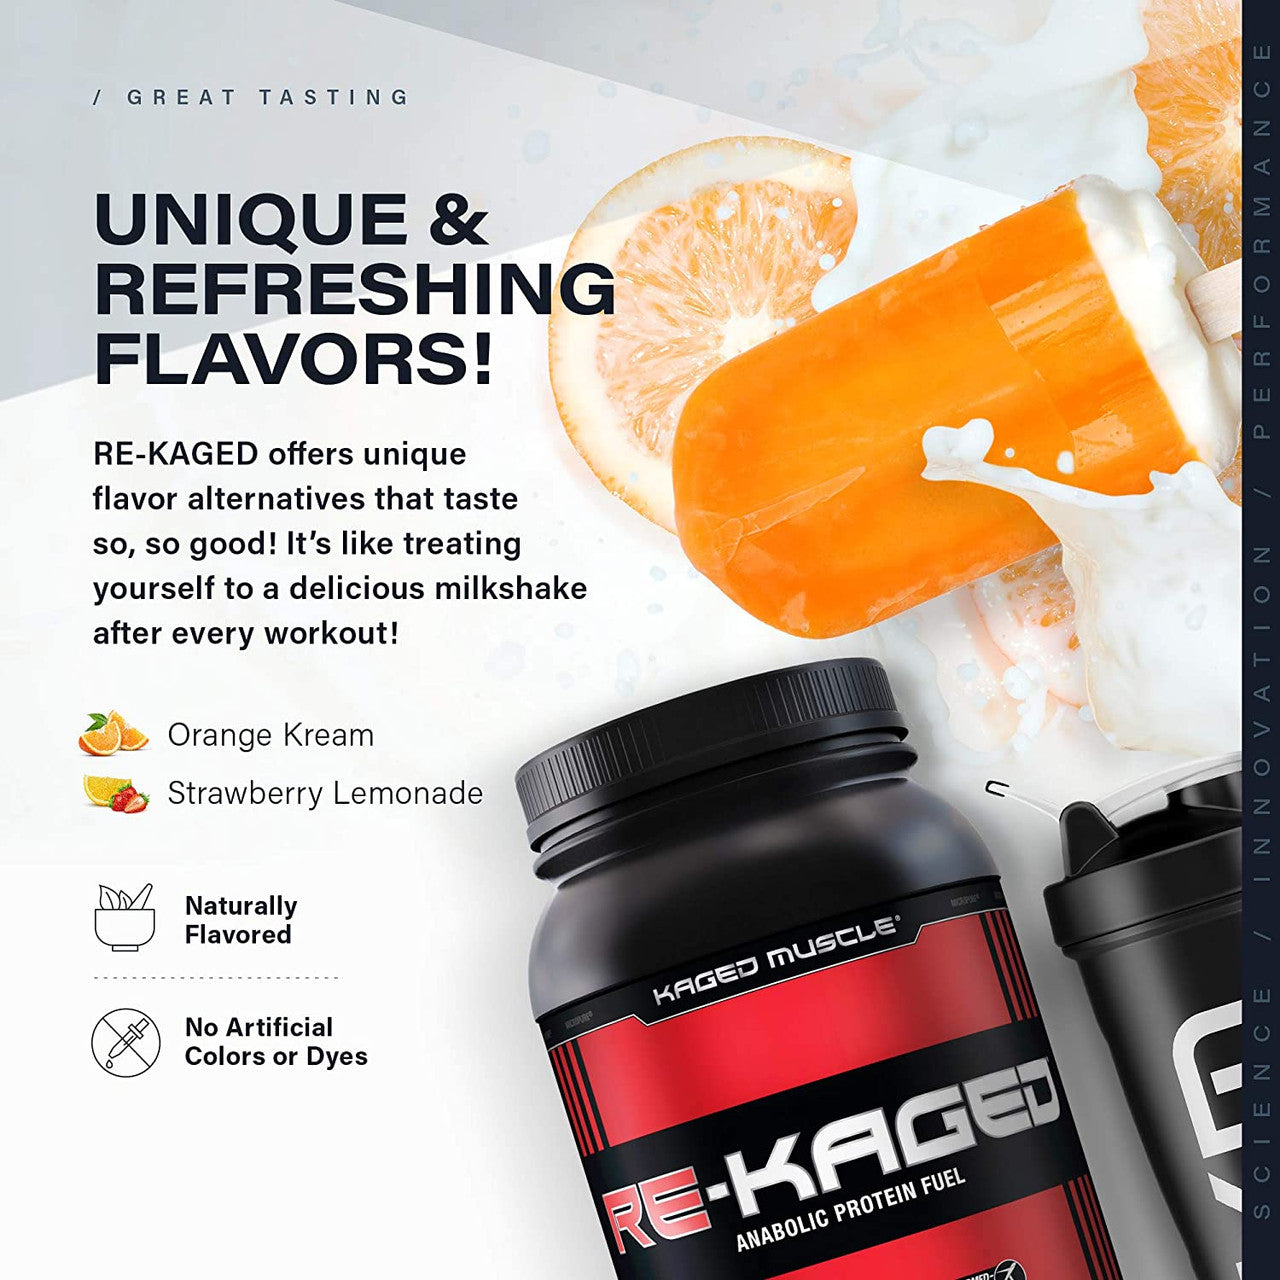 Kaged Muscle Re-Kaged flavors